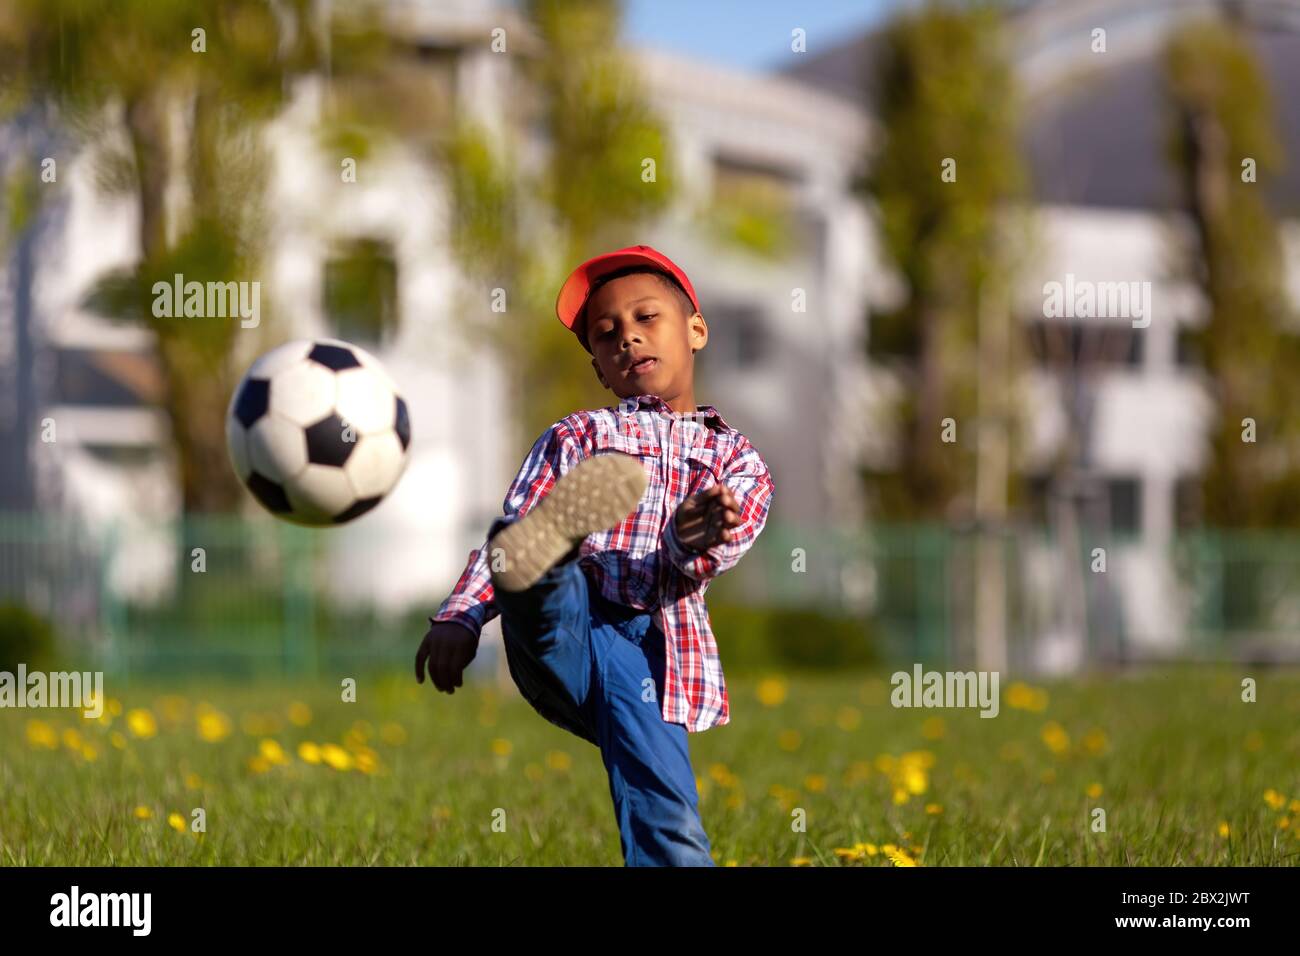 Little boy shooting at goal.Young african american soccer player kicking a football ball on a grass field. Stock Photo